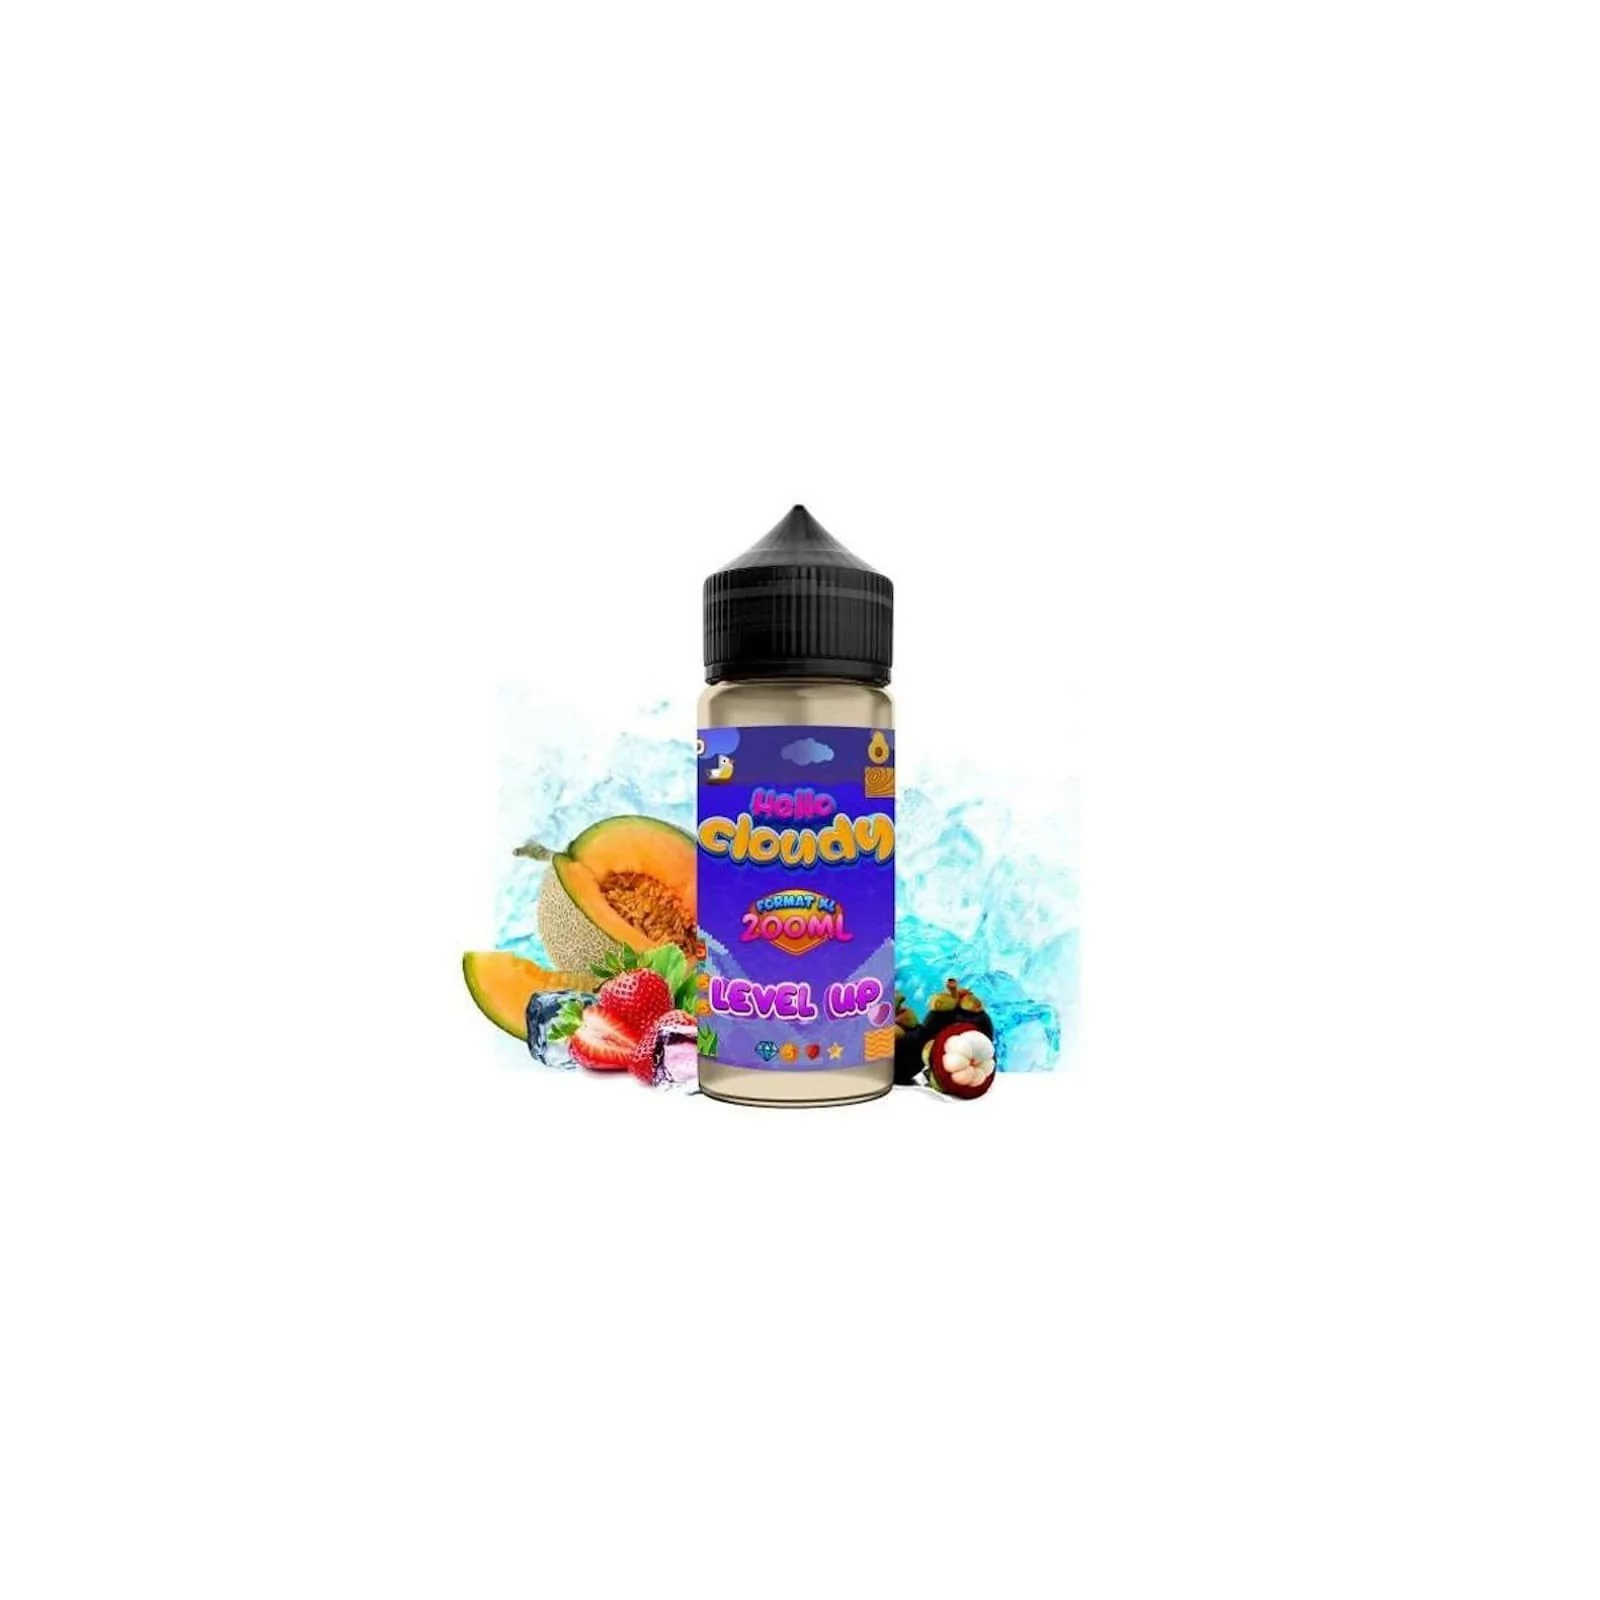 Level Up 200ml - Hello Cloudy